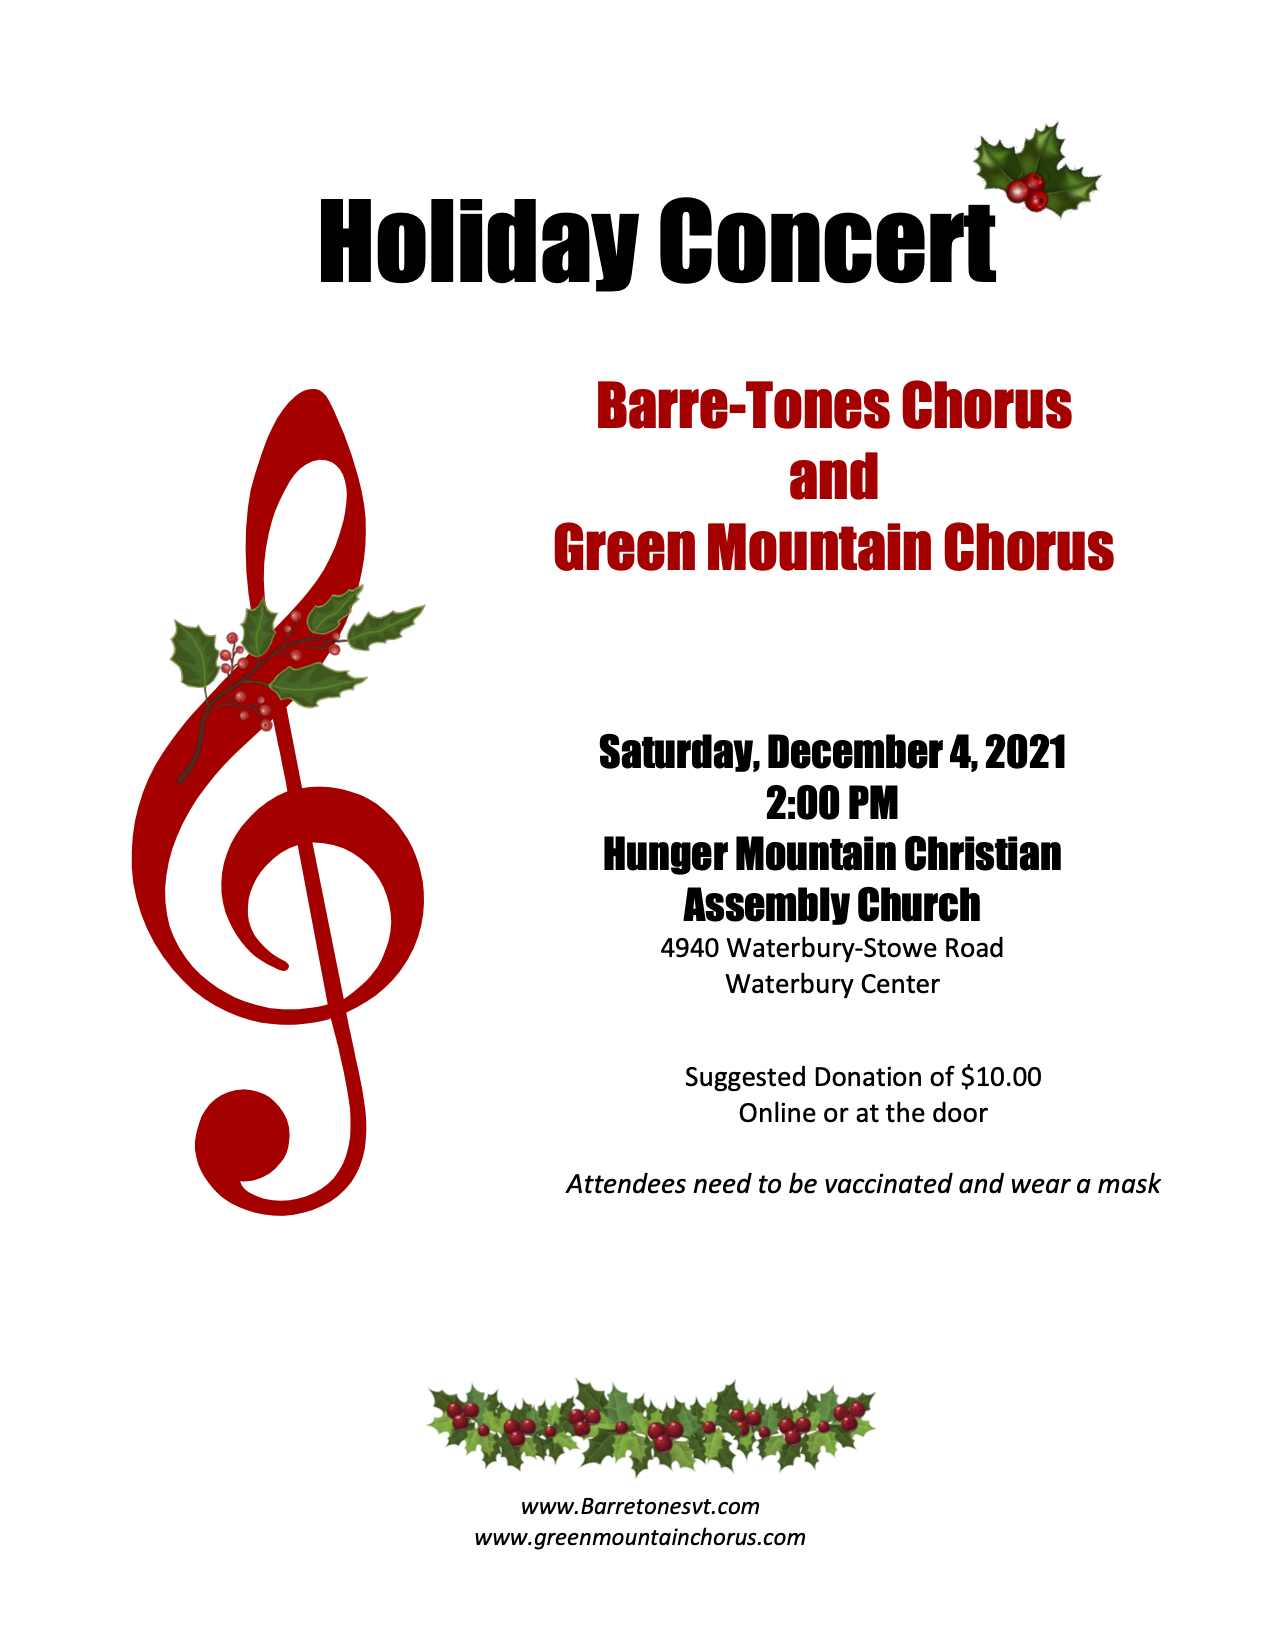 Joint Holiday Show with Barre-Tones